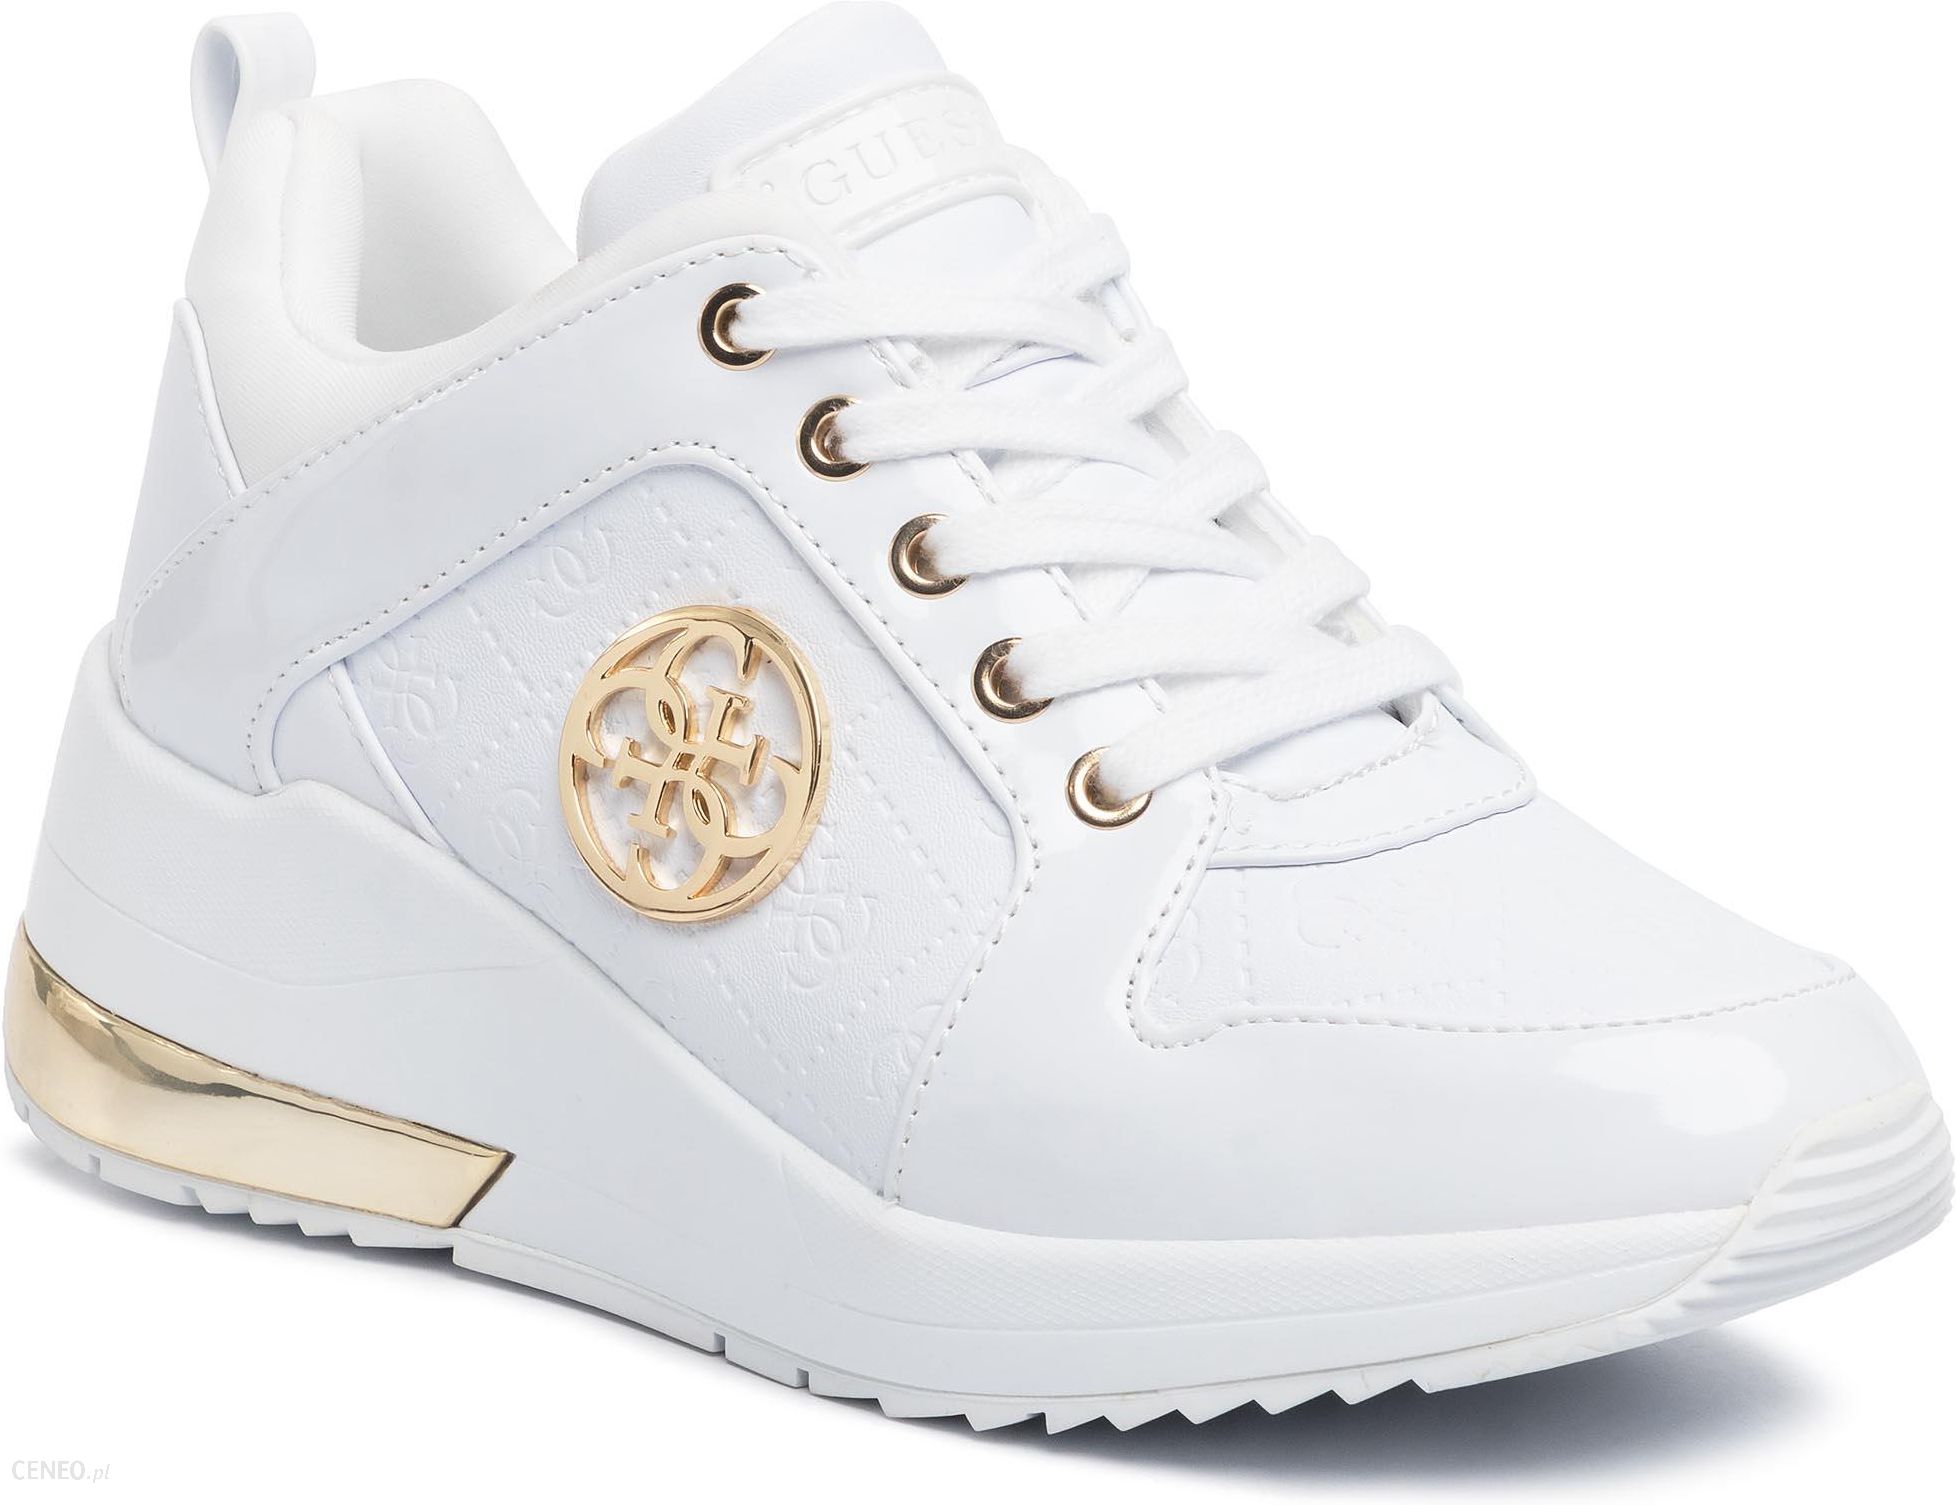 Sneakersy GUESS - WHITE - Ceny i opinie - Ceneo.pl